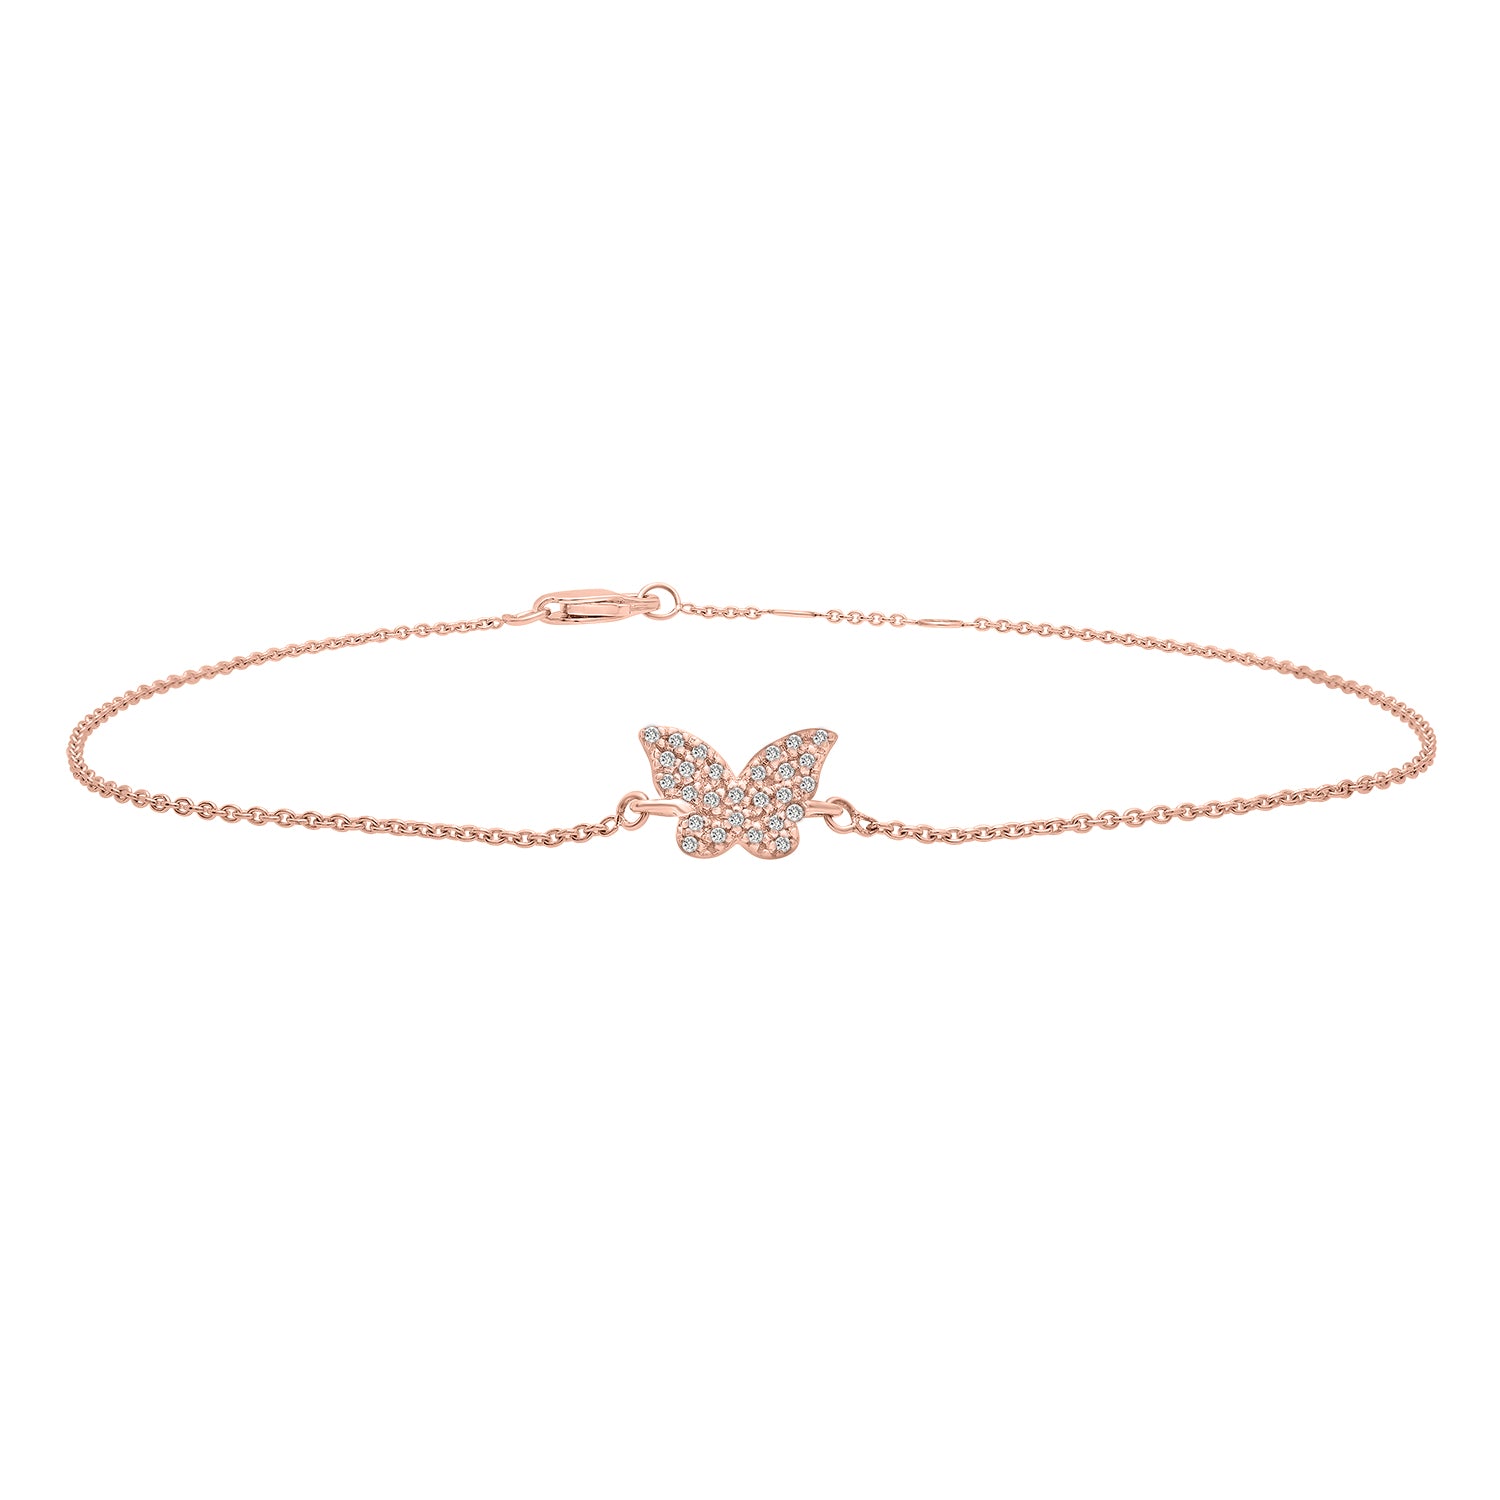 Brie Diamond Butterfly Bracelet with Silver Pendent